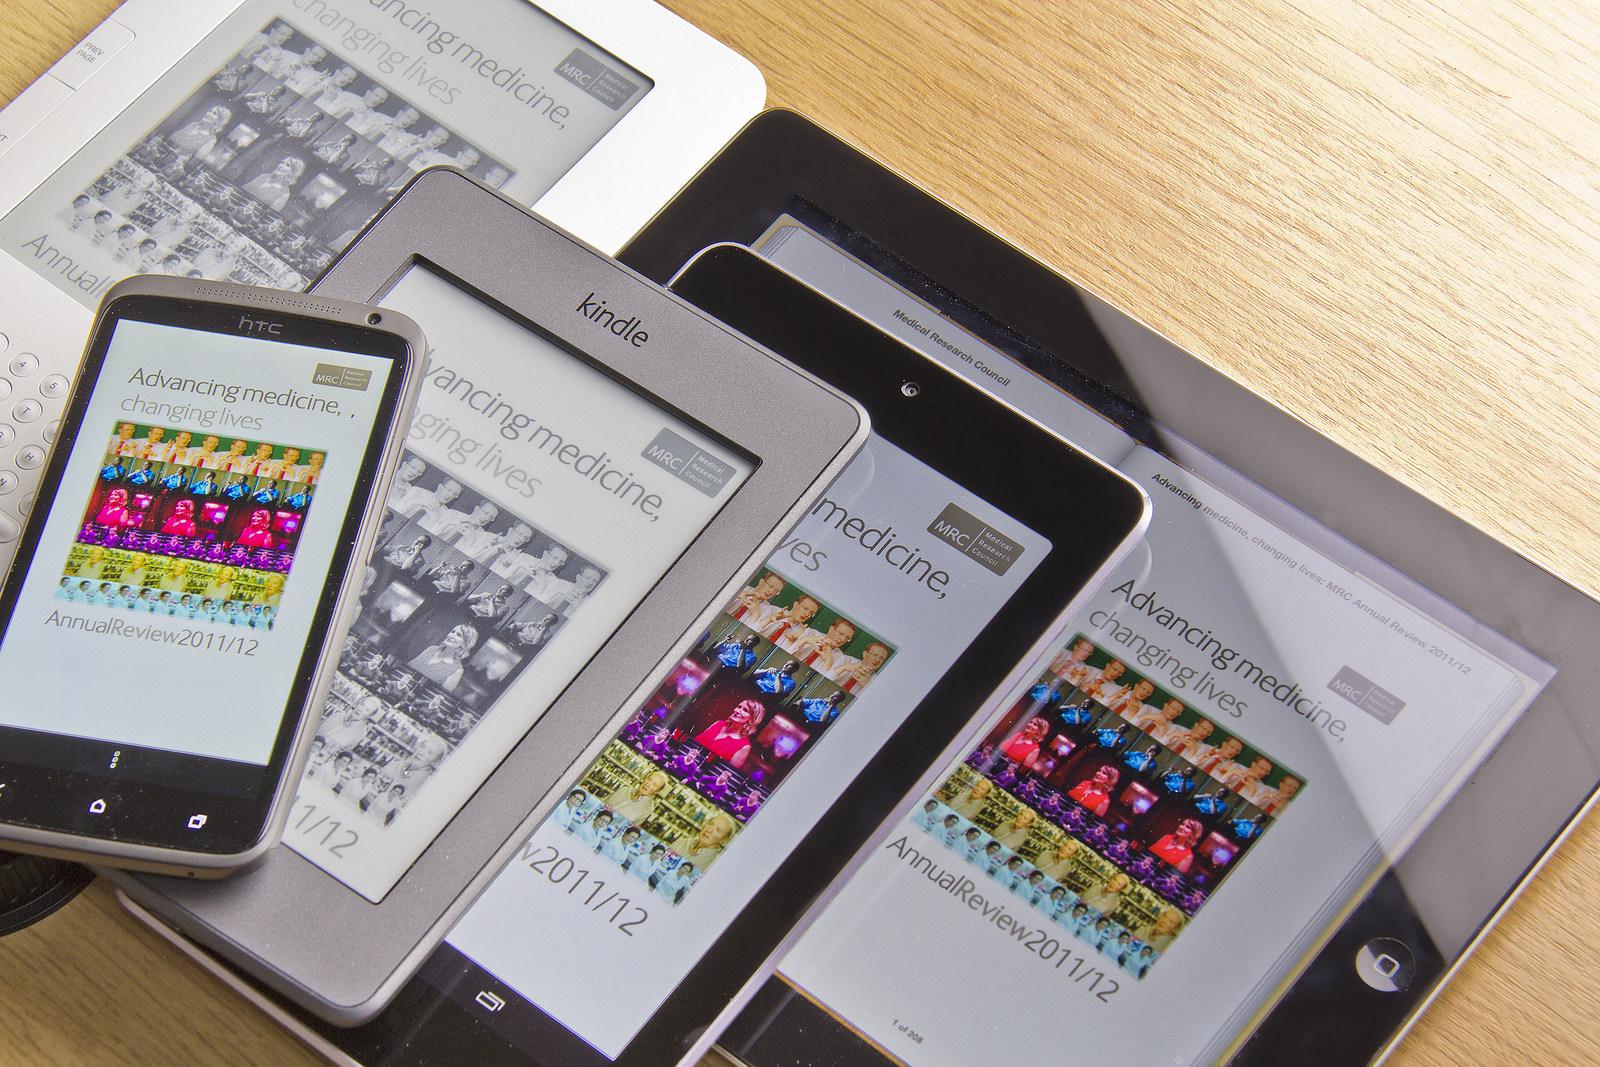 The ebook on multiple devices